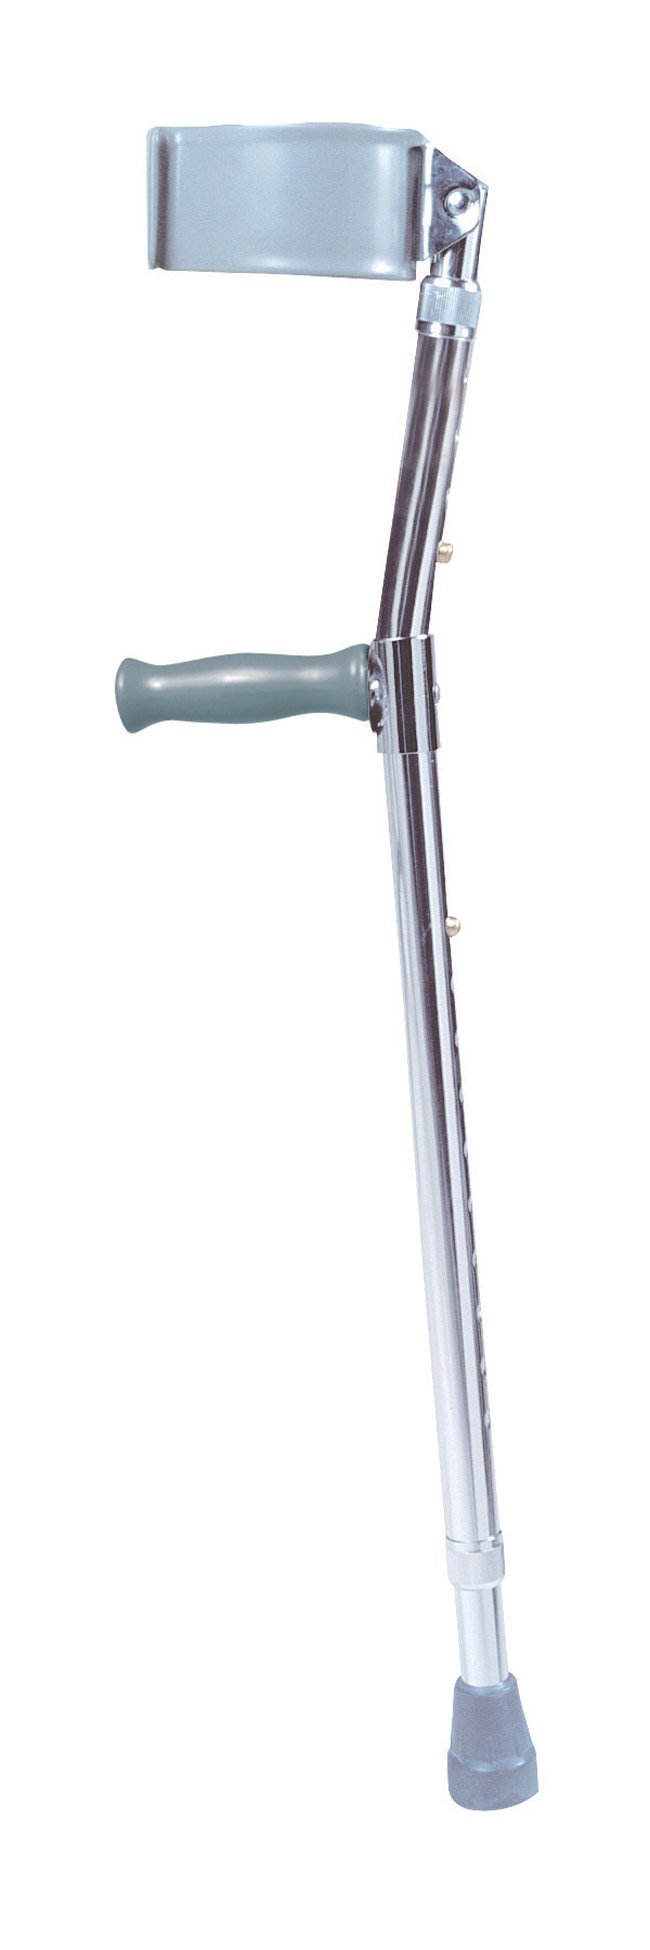 Picture of Drive Medical 10405 Steel Forearm Crutch Tall